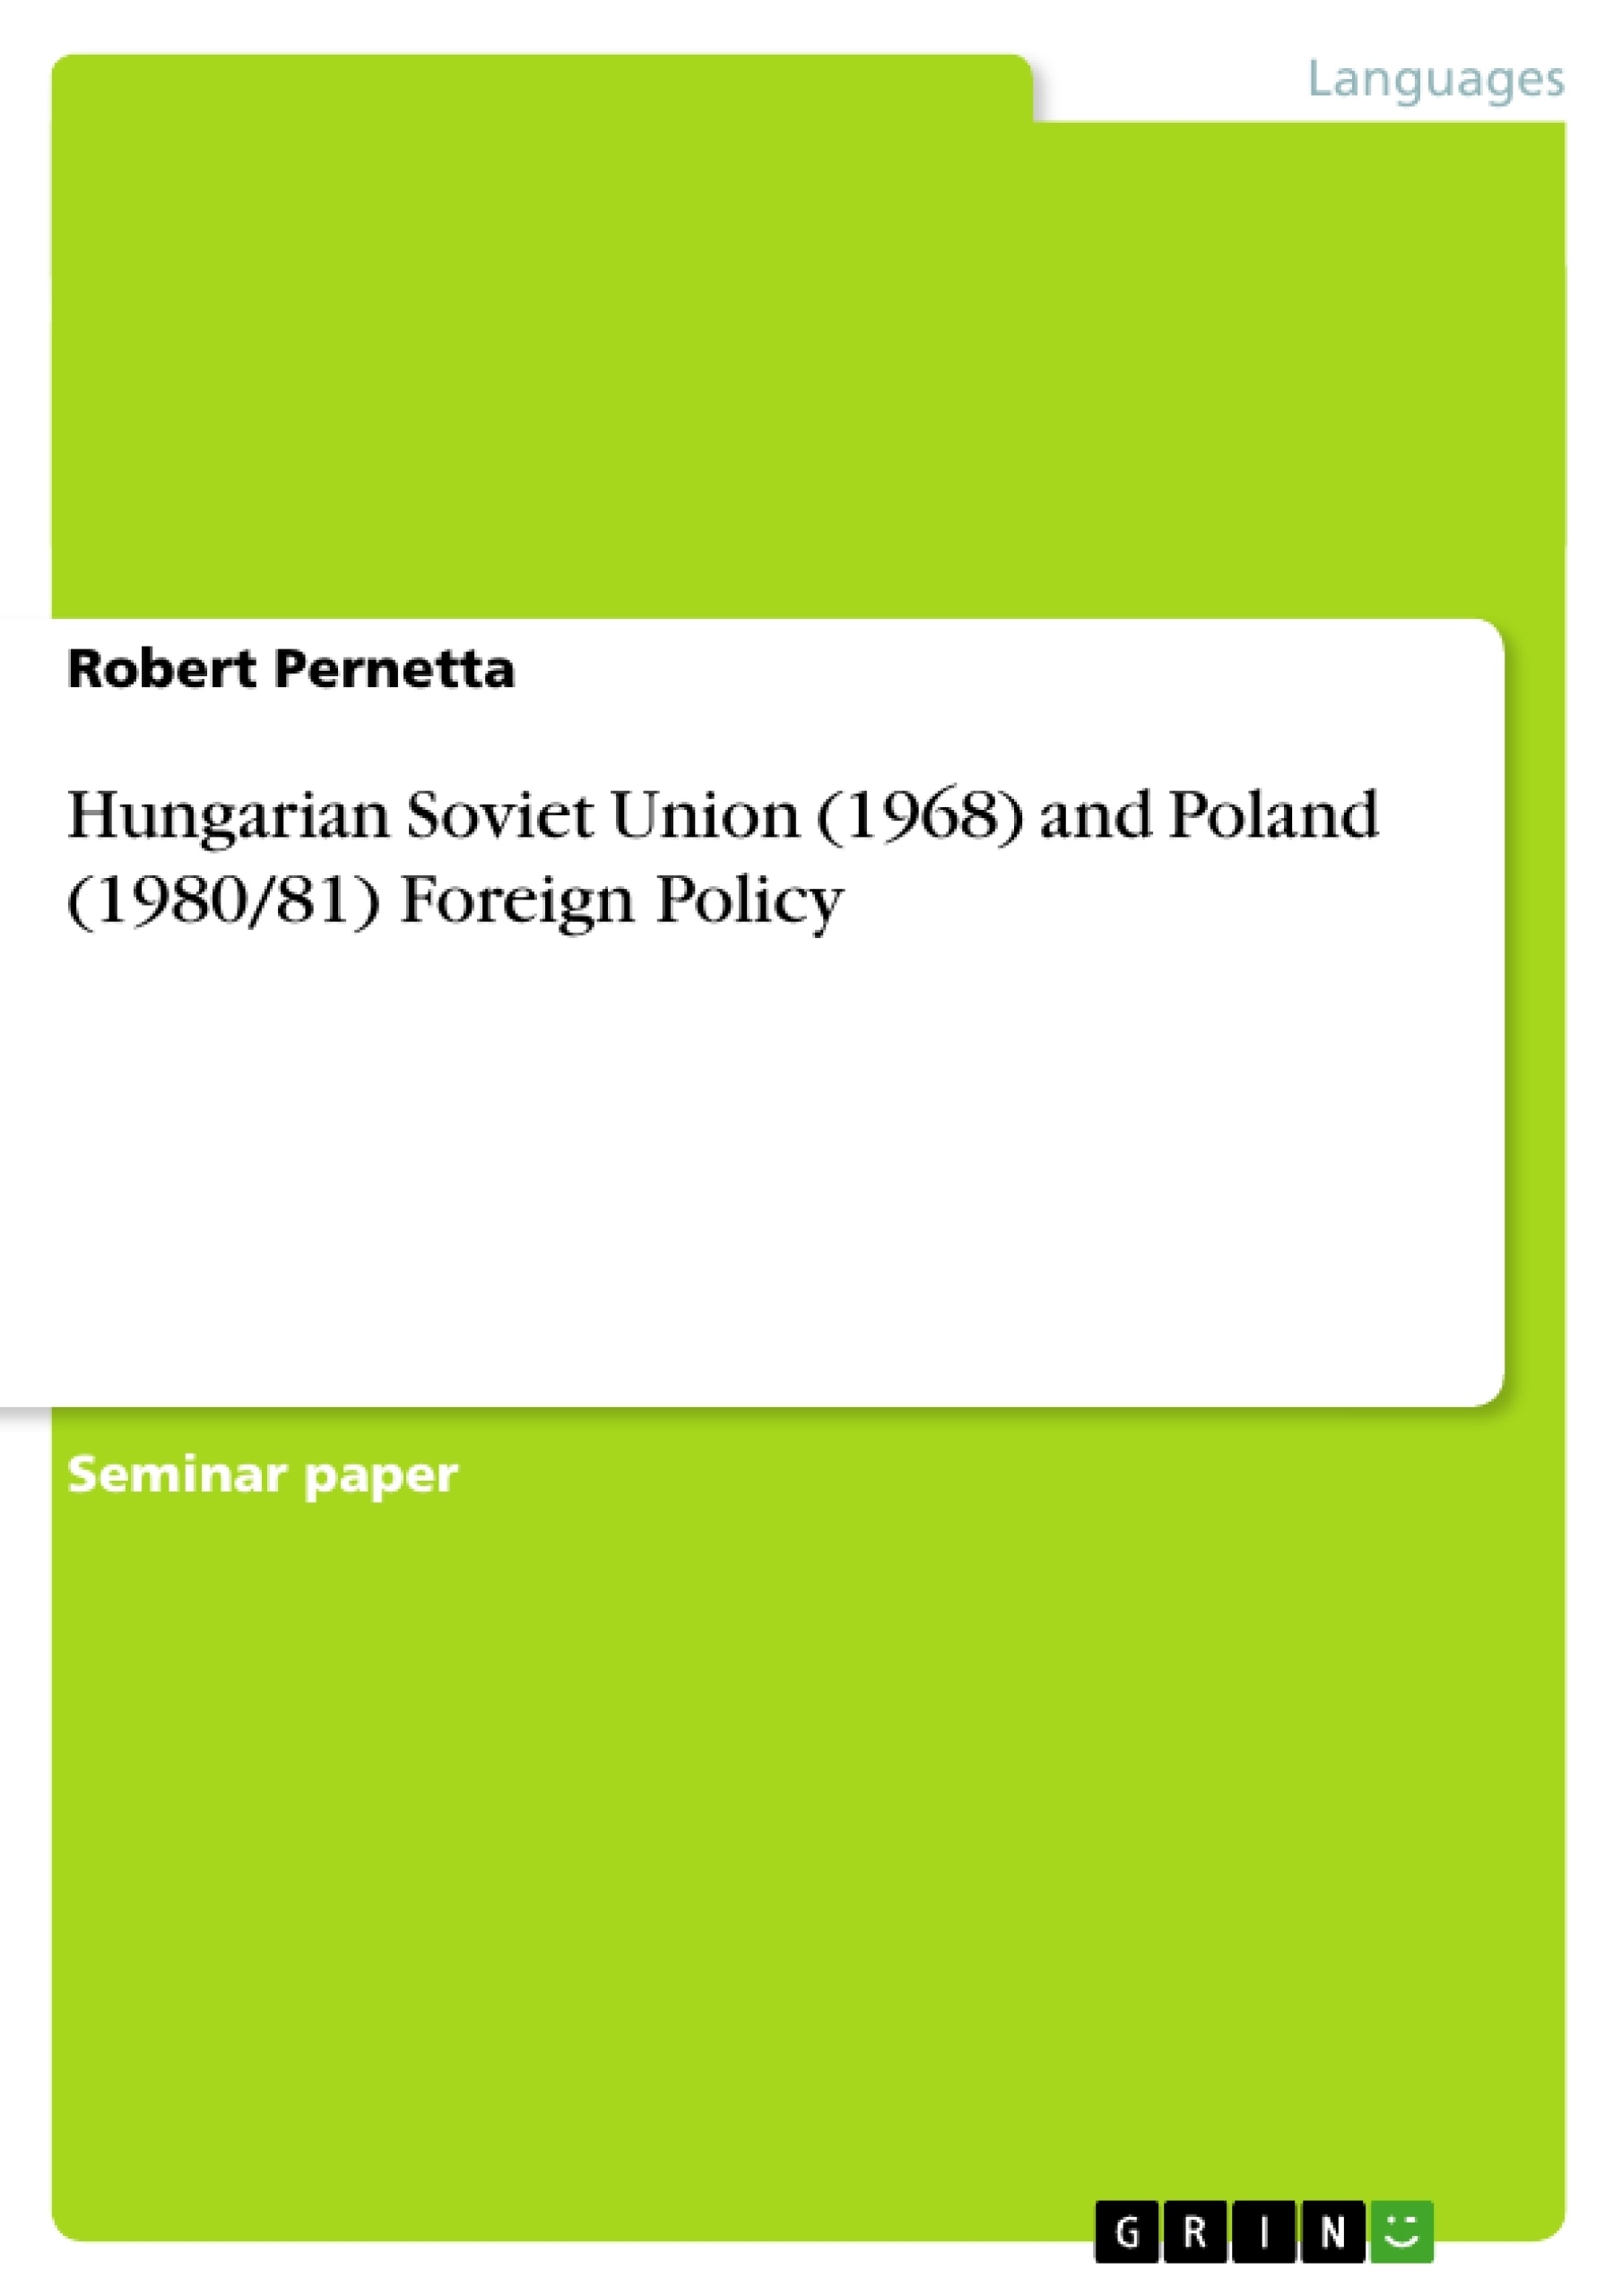 Titel: Hungarian Soviet Union (1968) and Poland (1980/81) Foreign Policy